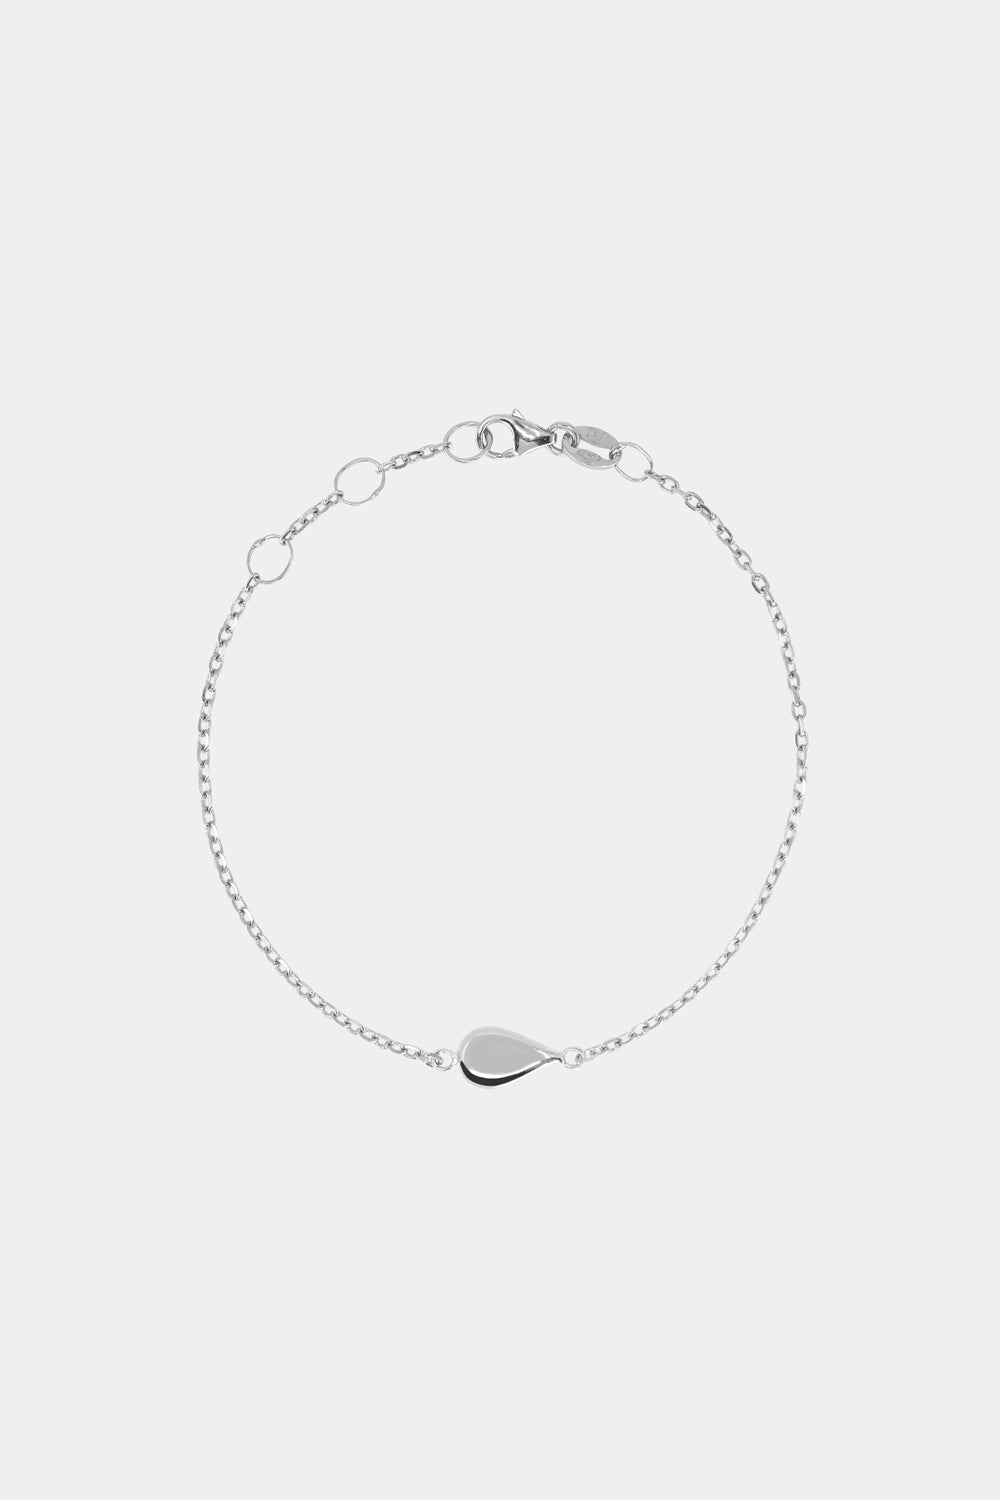 Pear Bracelet | Silver or 9K White Gold, More Options Available| Natasha Schweitzer